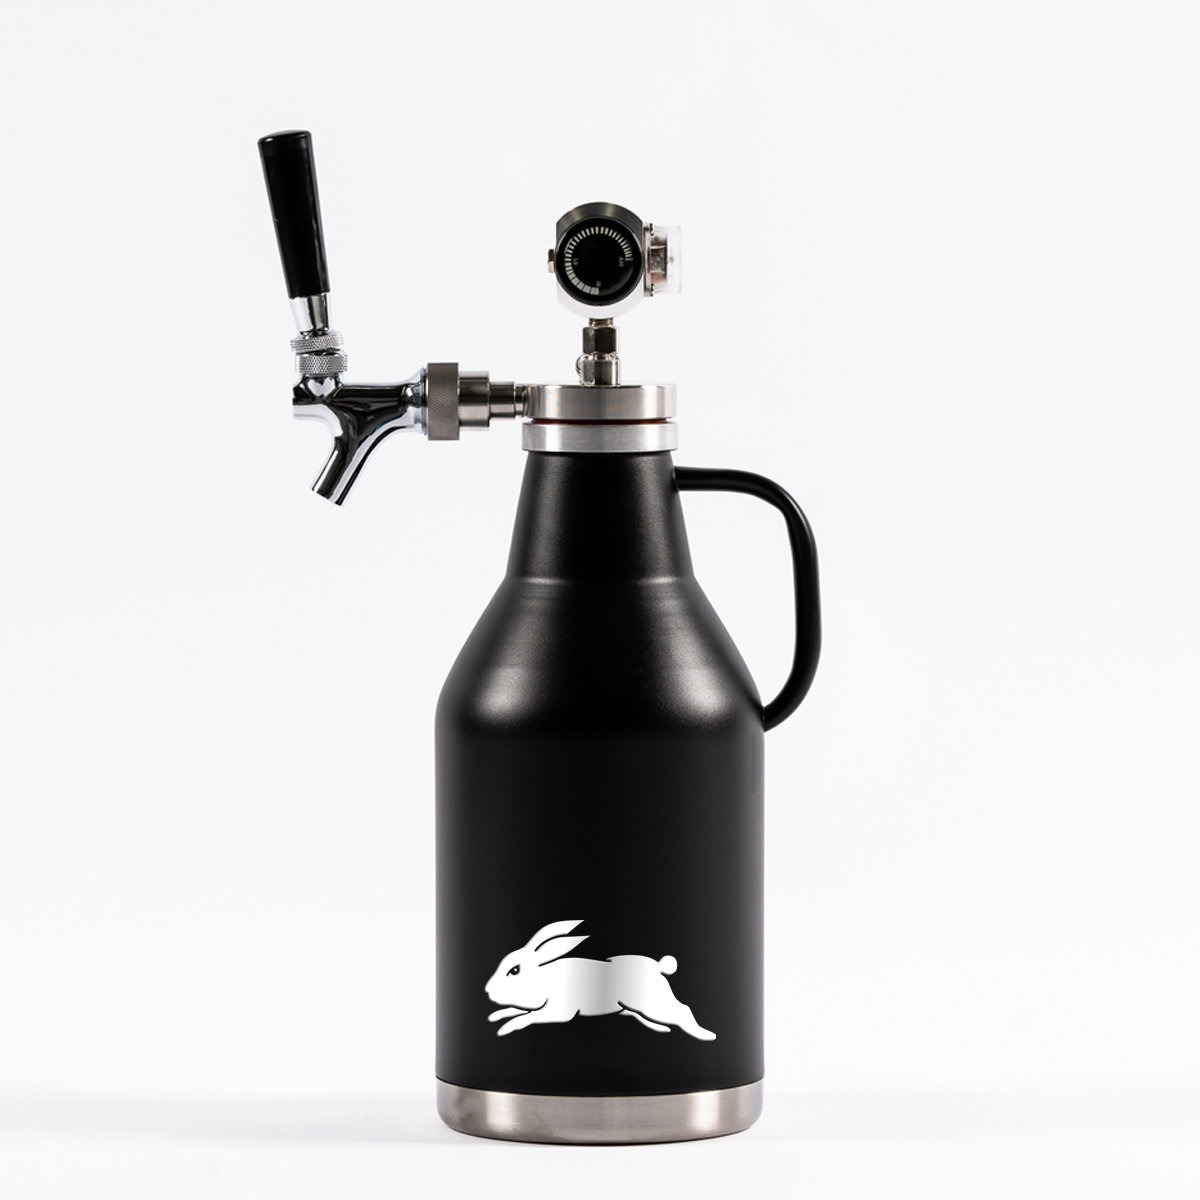 South Sydney Rabbitohs NRL Beer Growler 2L With Tap System